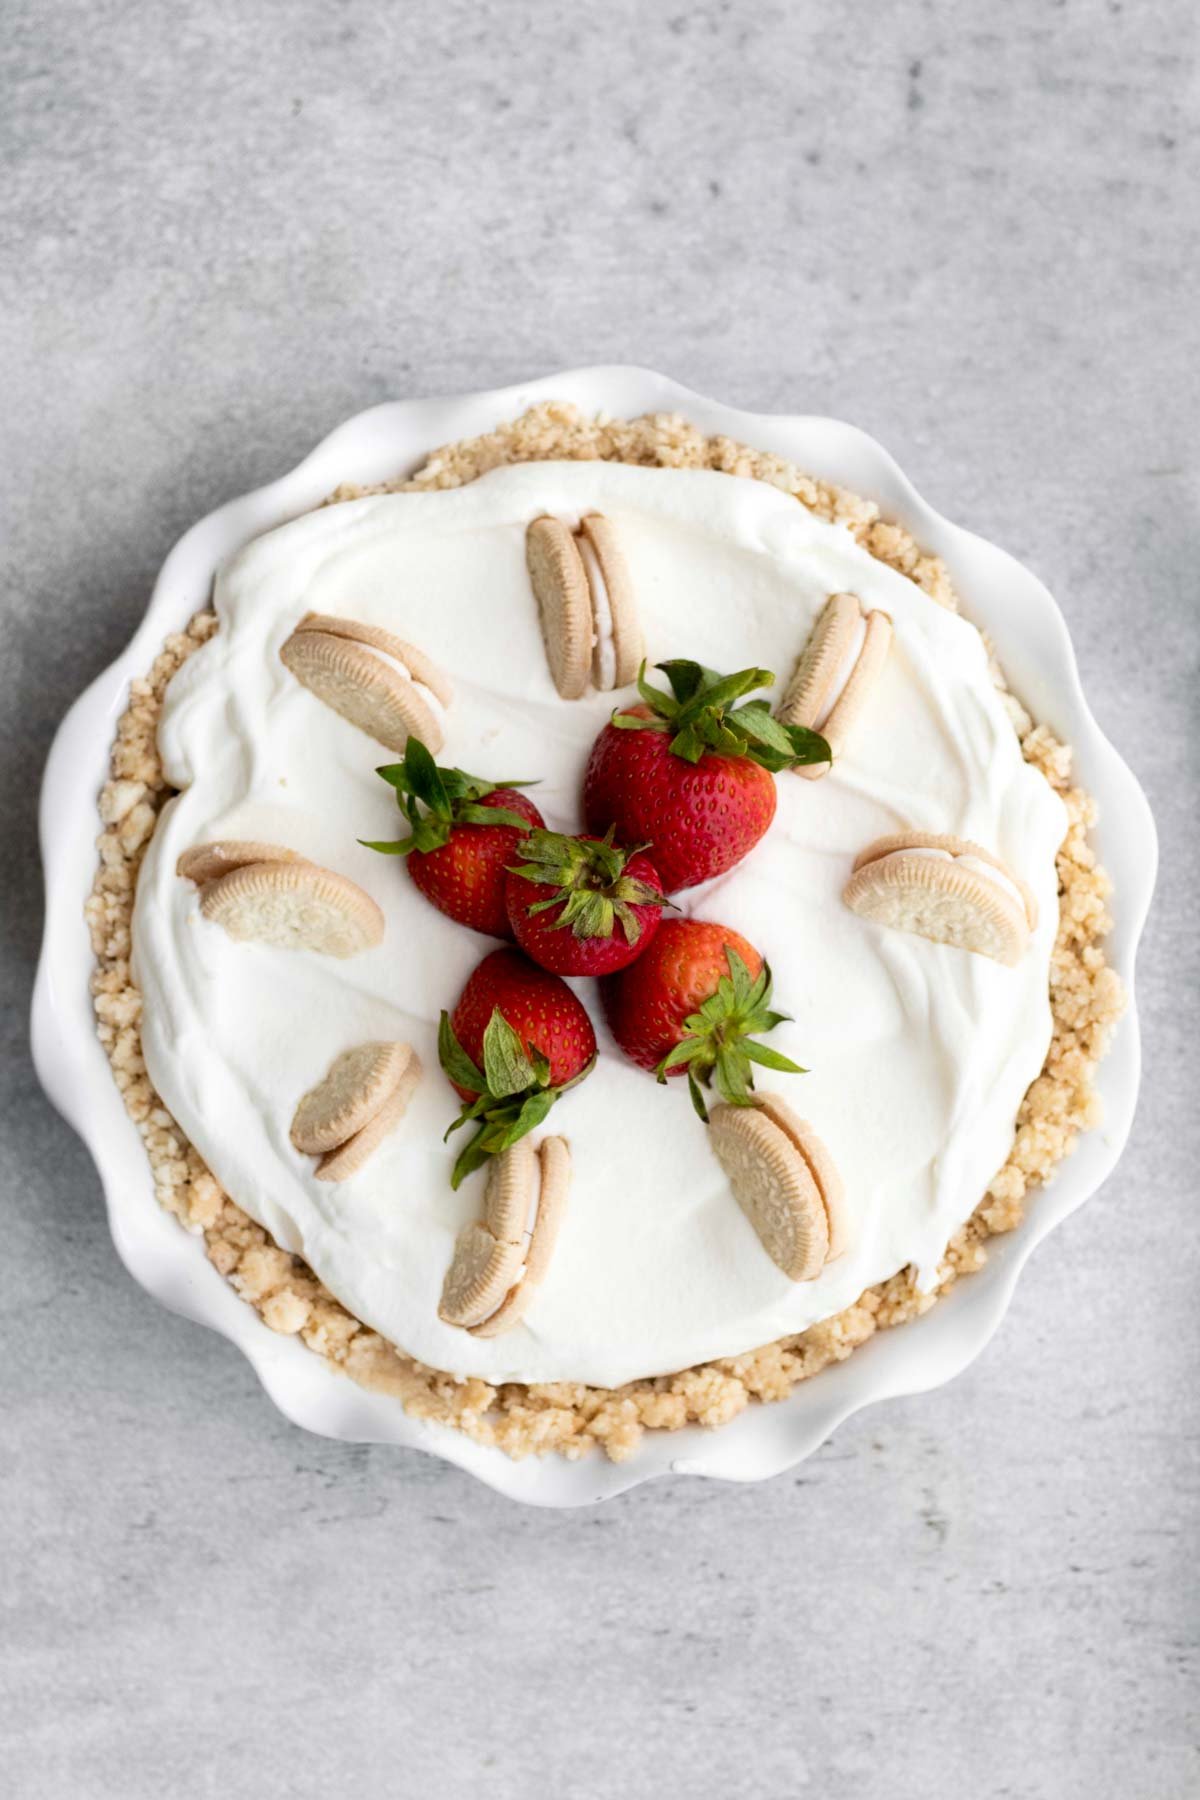 A pie topped with golden sandwich cookies and strawberries.